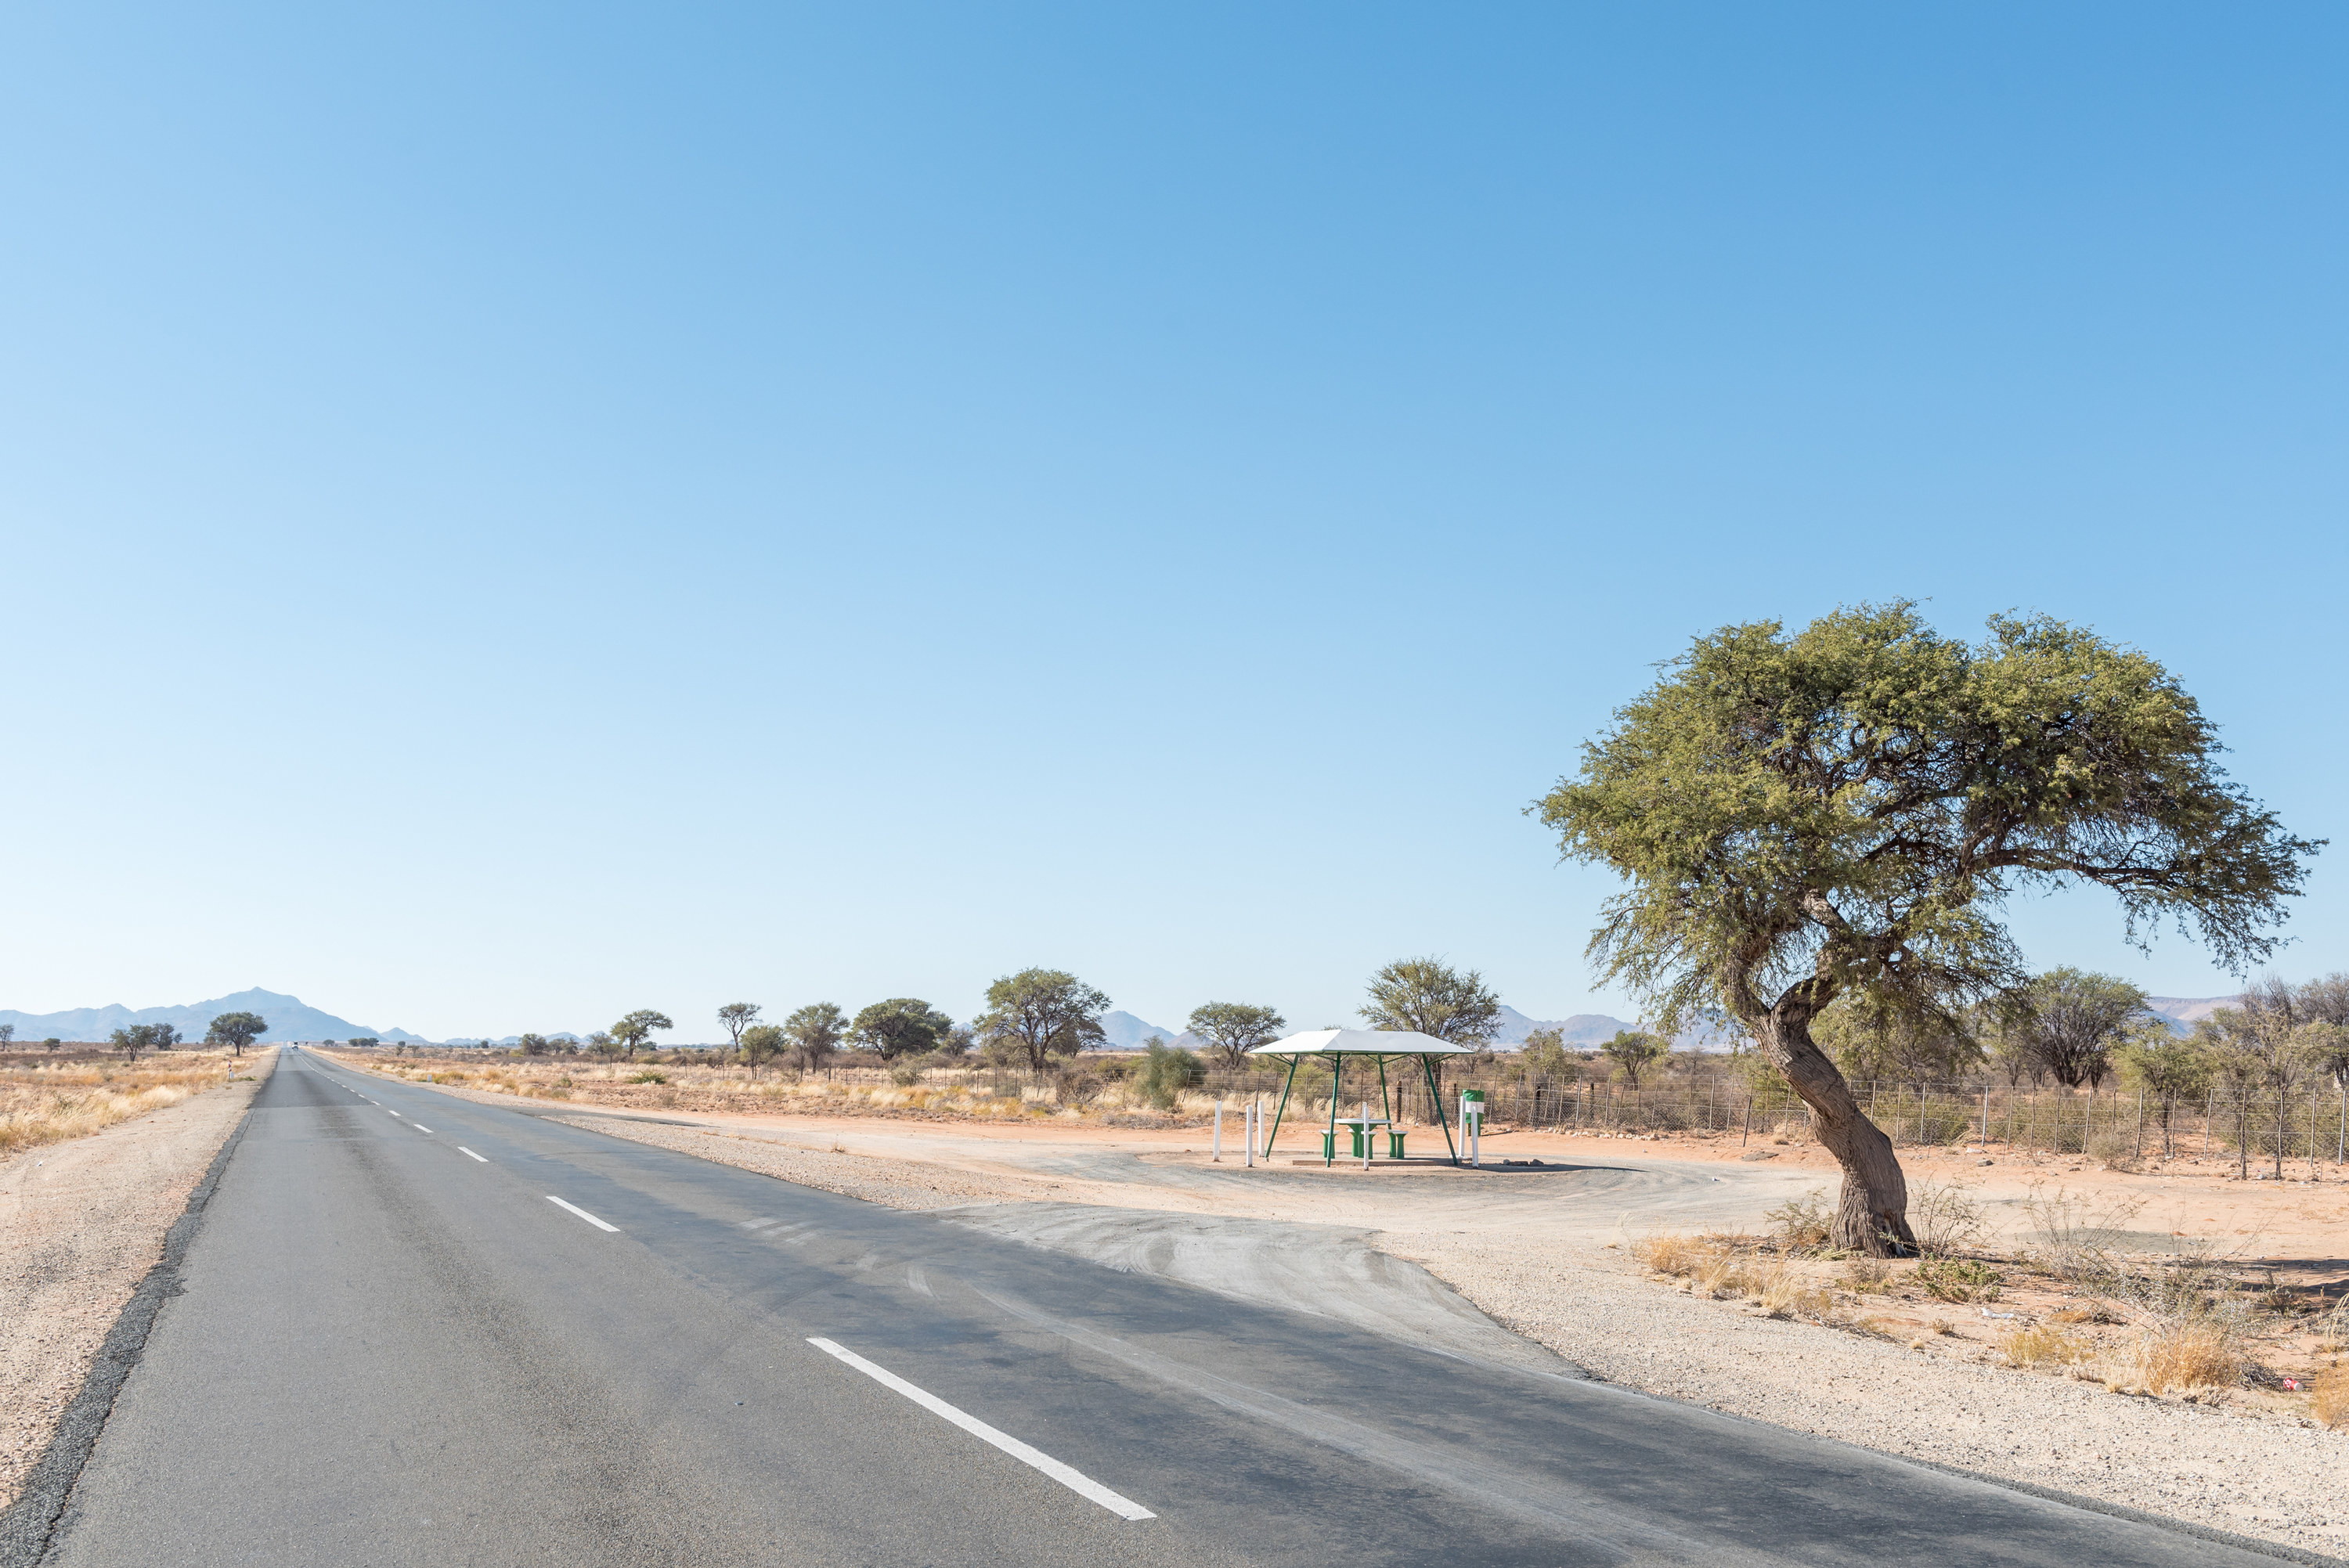 desolate road in namibia with a small rest stop